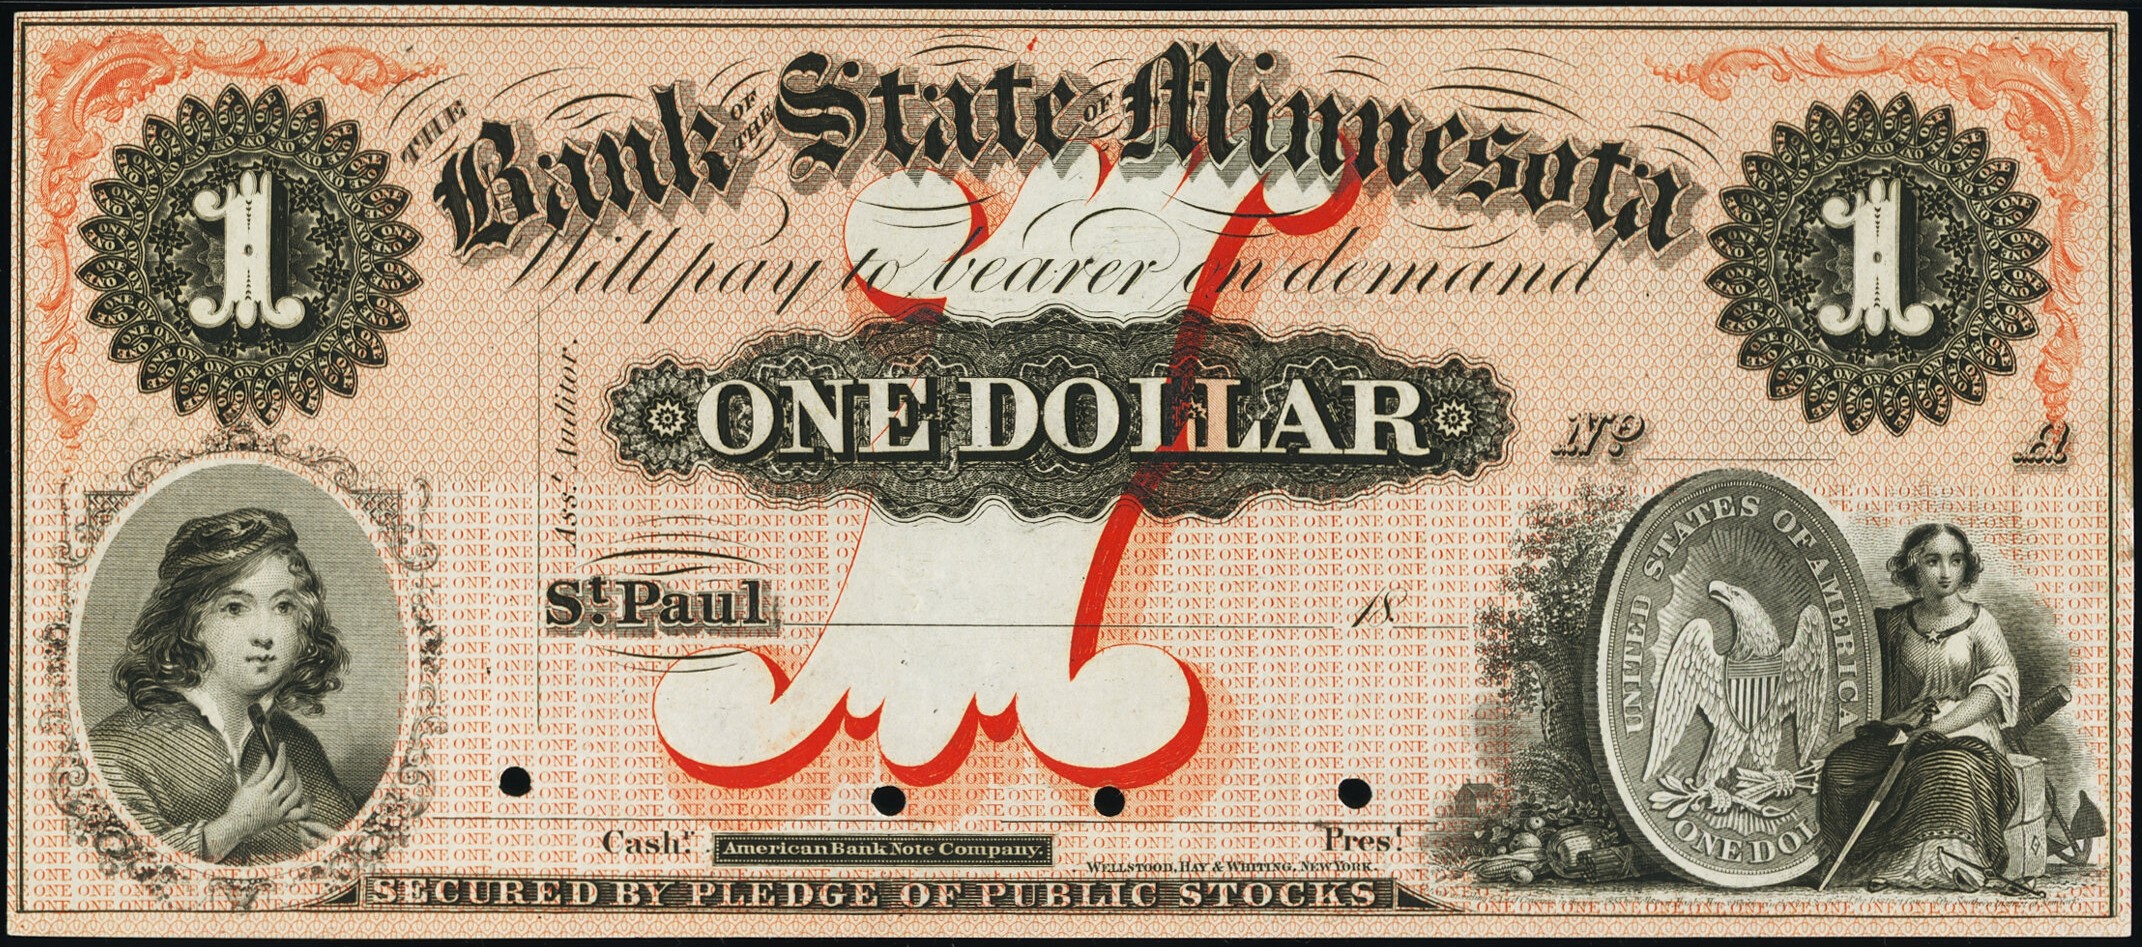 $1 Bank of the State of Minnesota